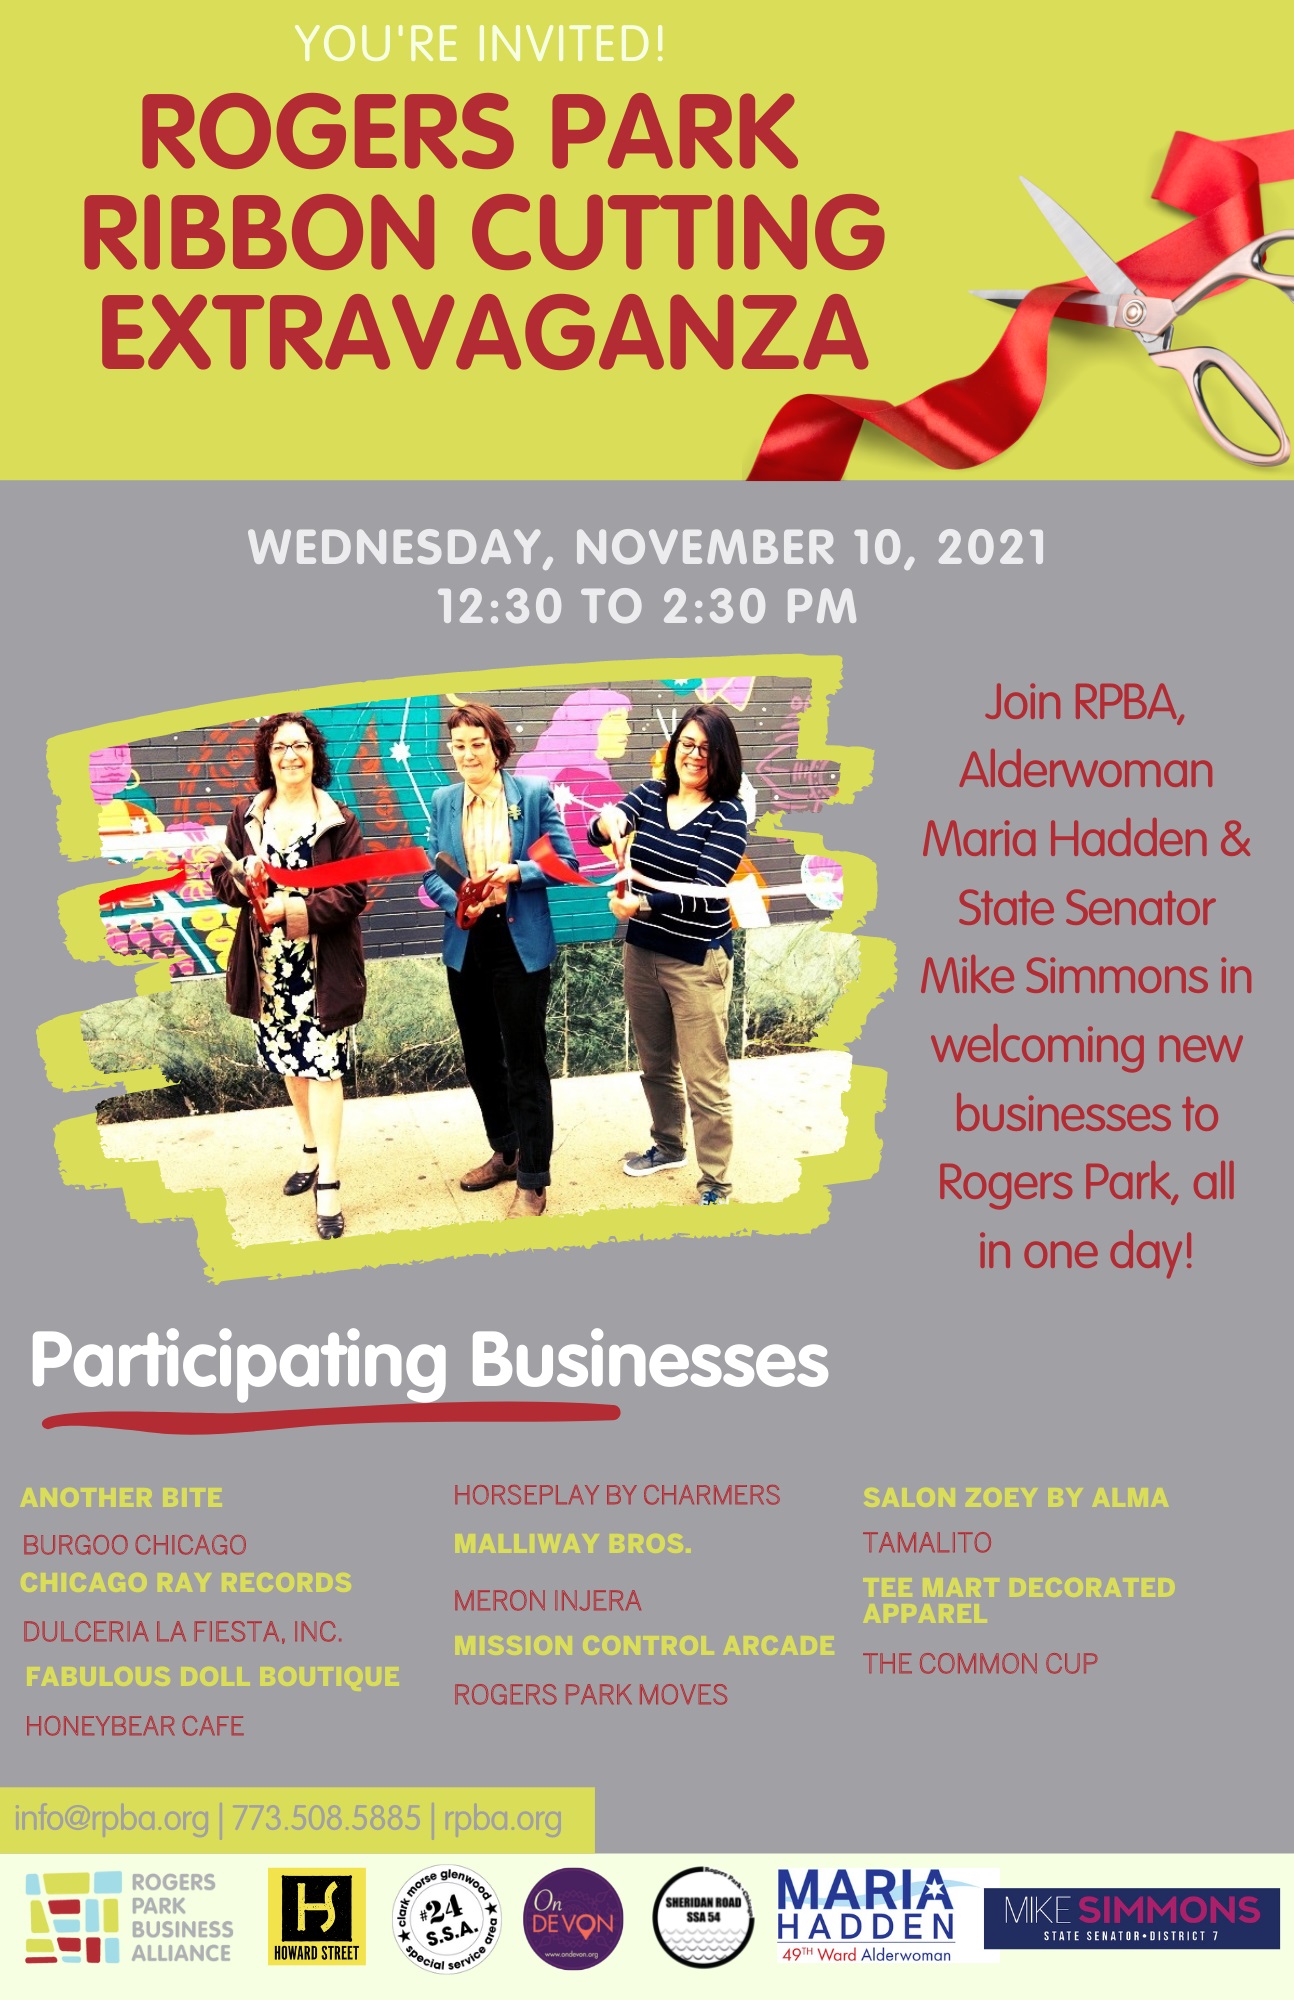 Rogers Park Ribbon Cutting Extravaganza, rogers-park-business-alliance